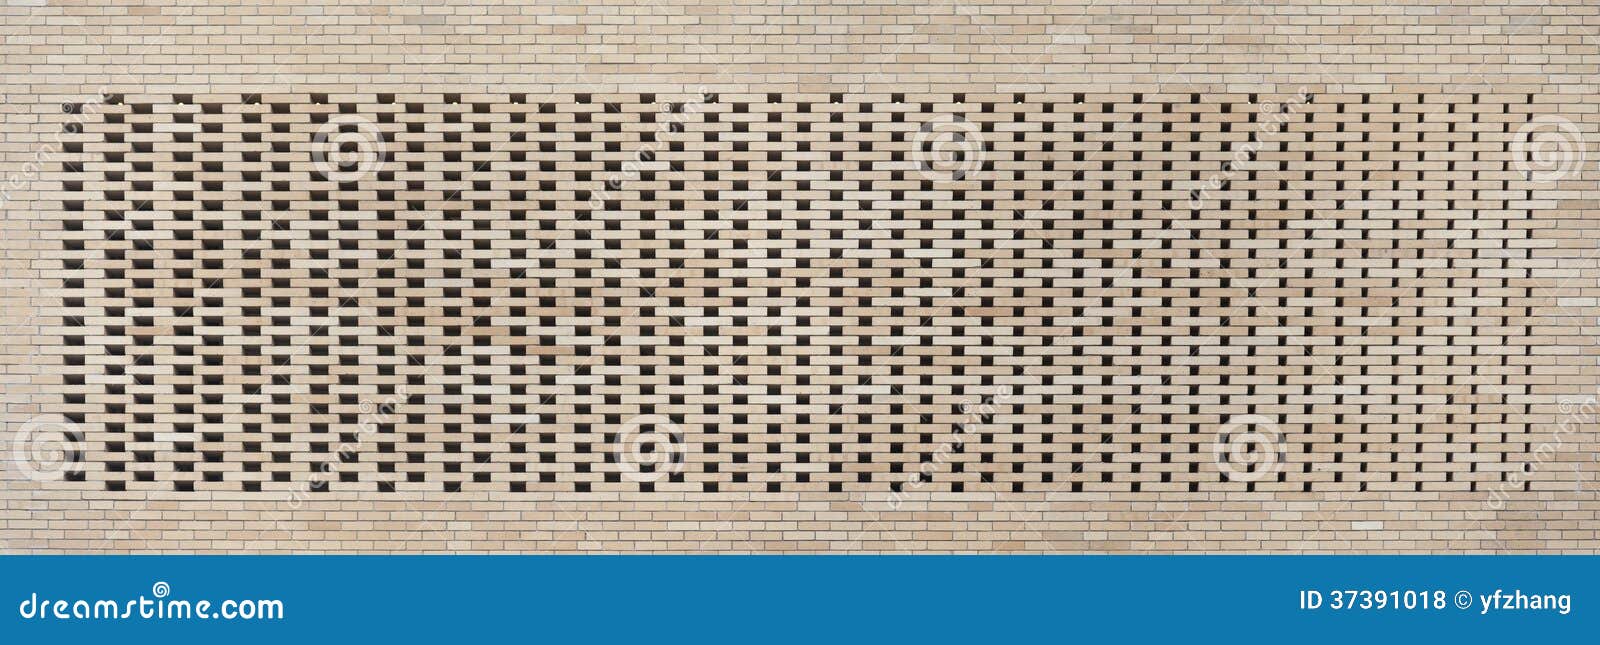 hollow brick wall texture background